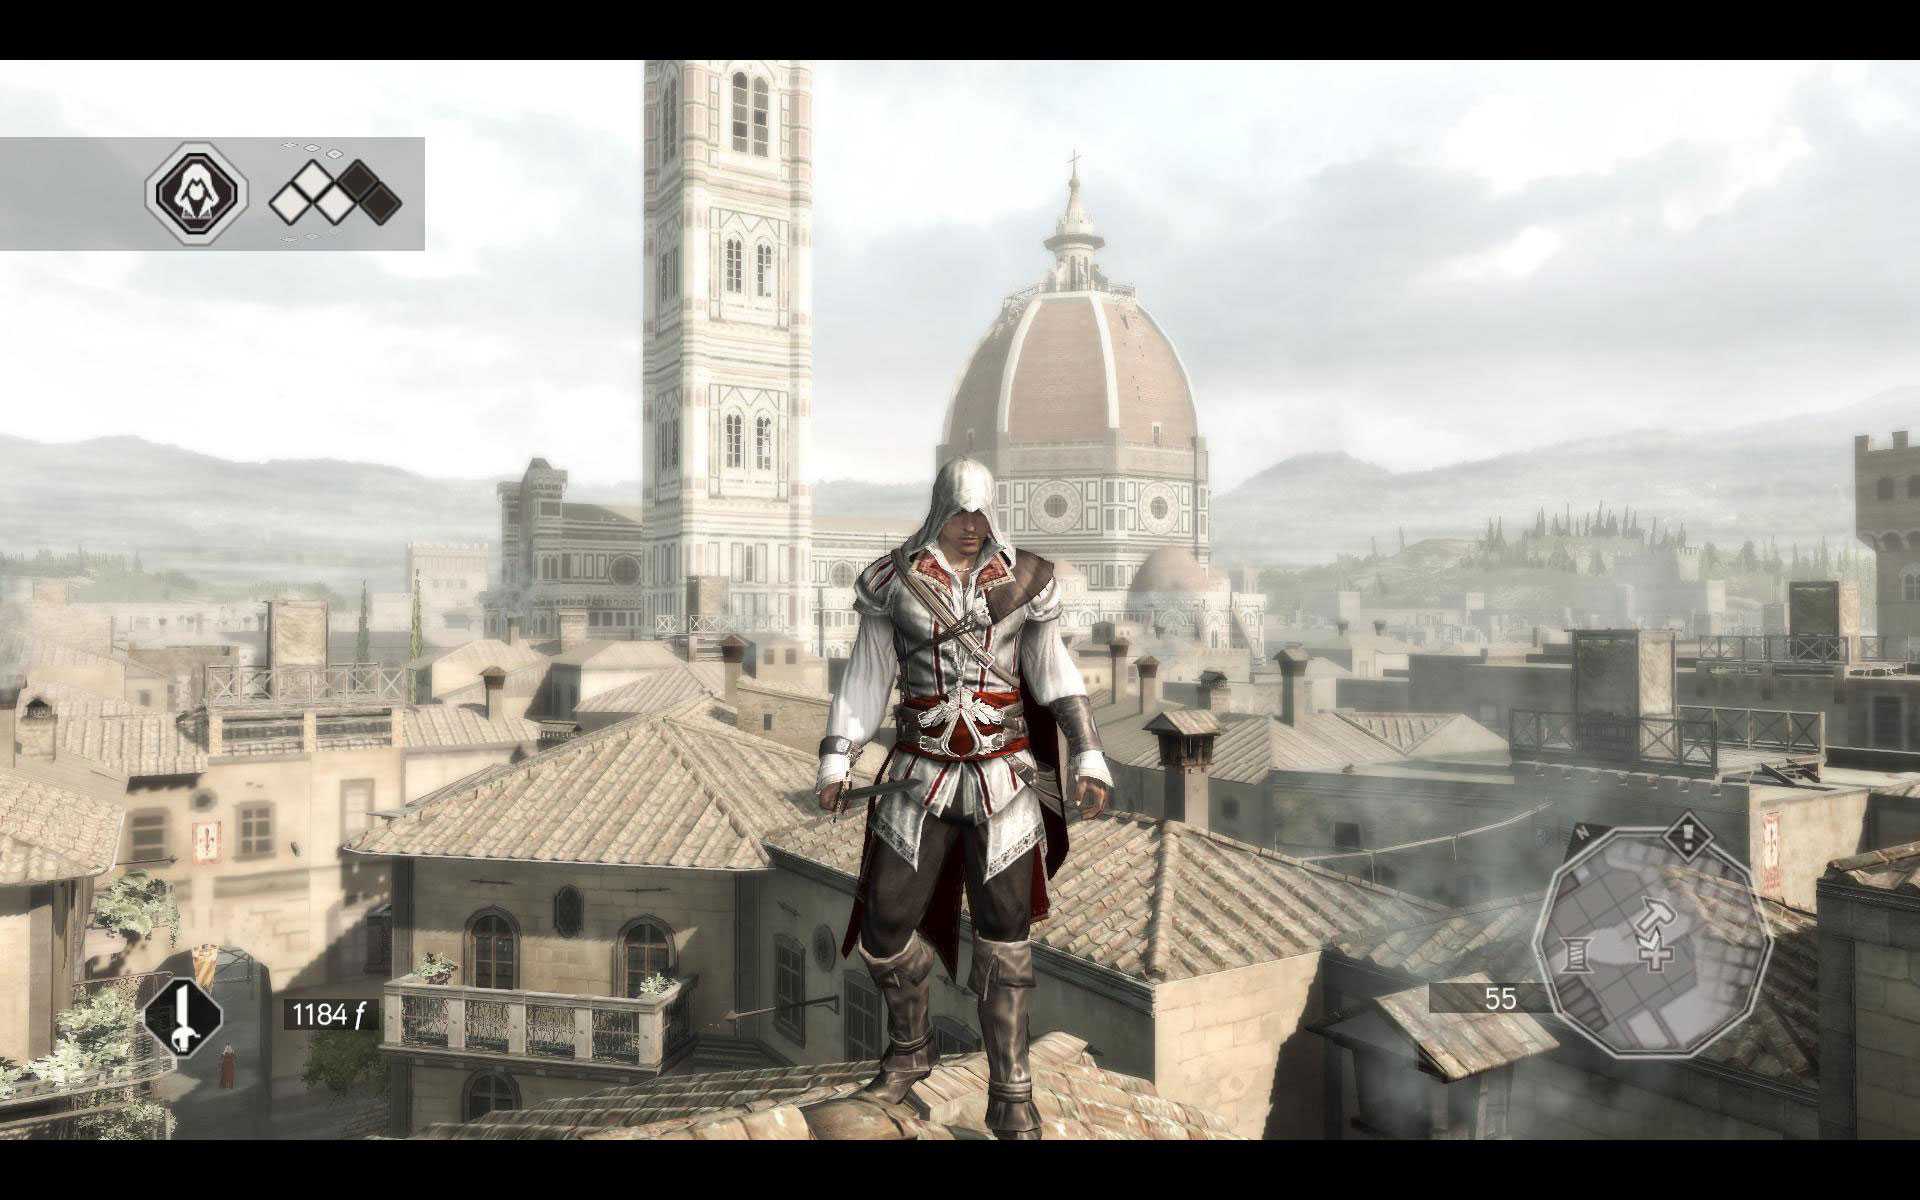 Creed 2 game. Assassin`s Creed 2. Assassin's Creed 2 геймплей. Assassin's Creed 2 #3. Assassins Creed 2 ассасин.